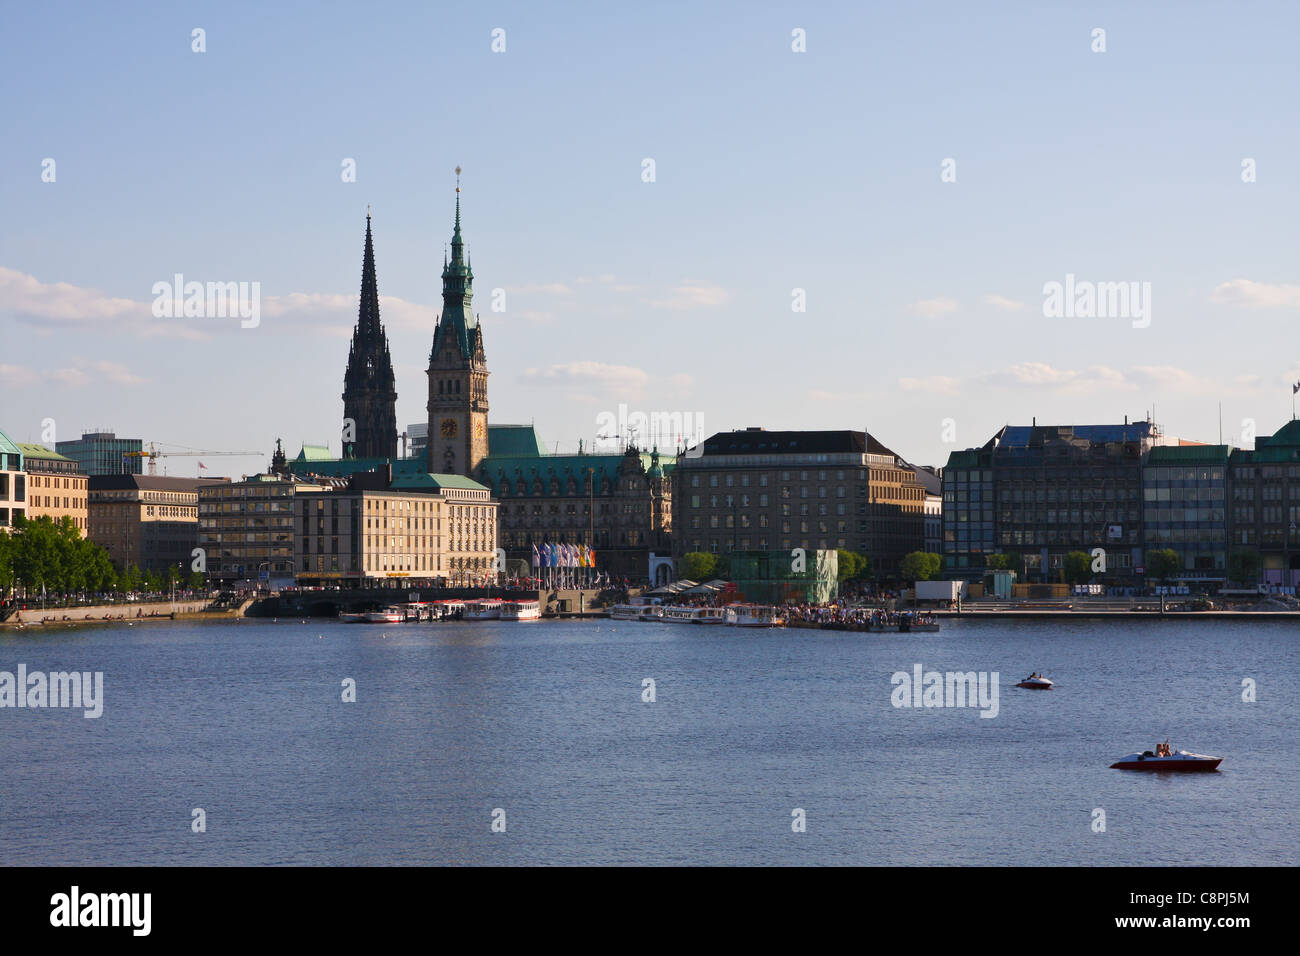 View of the Alster Lake in Hamburg, Germany Stock Photo